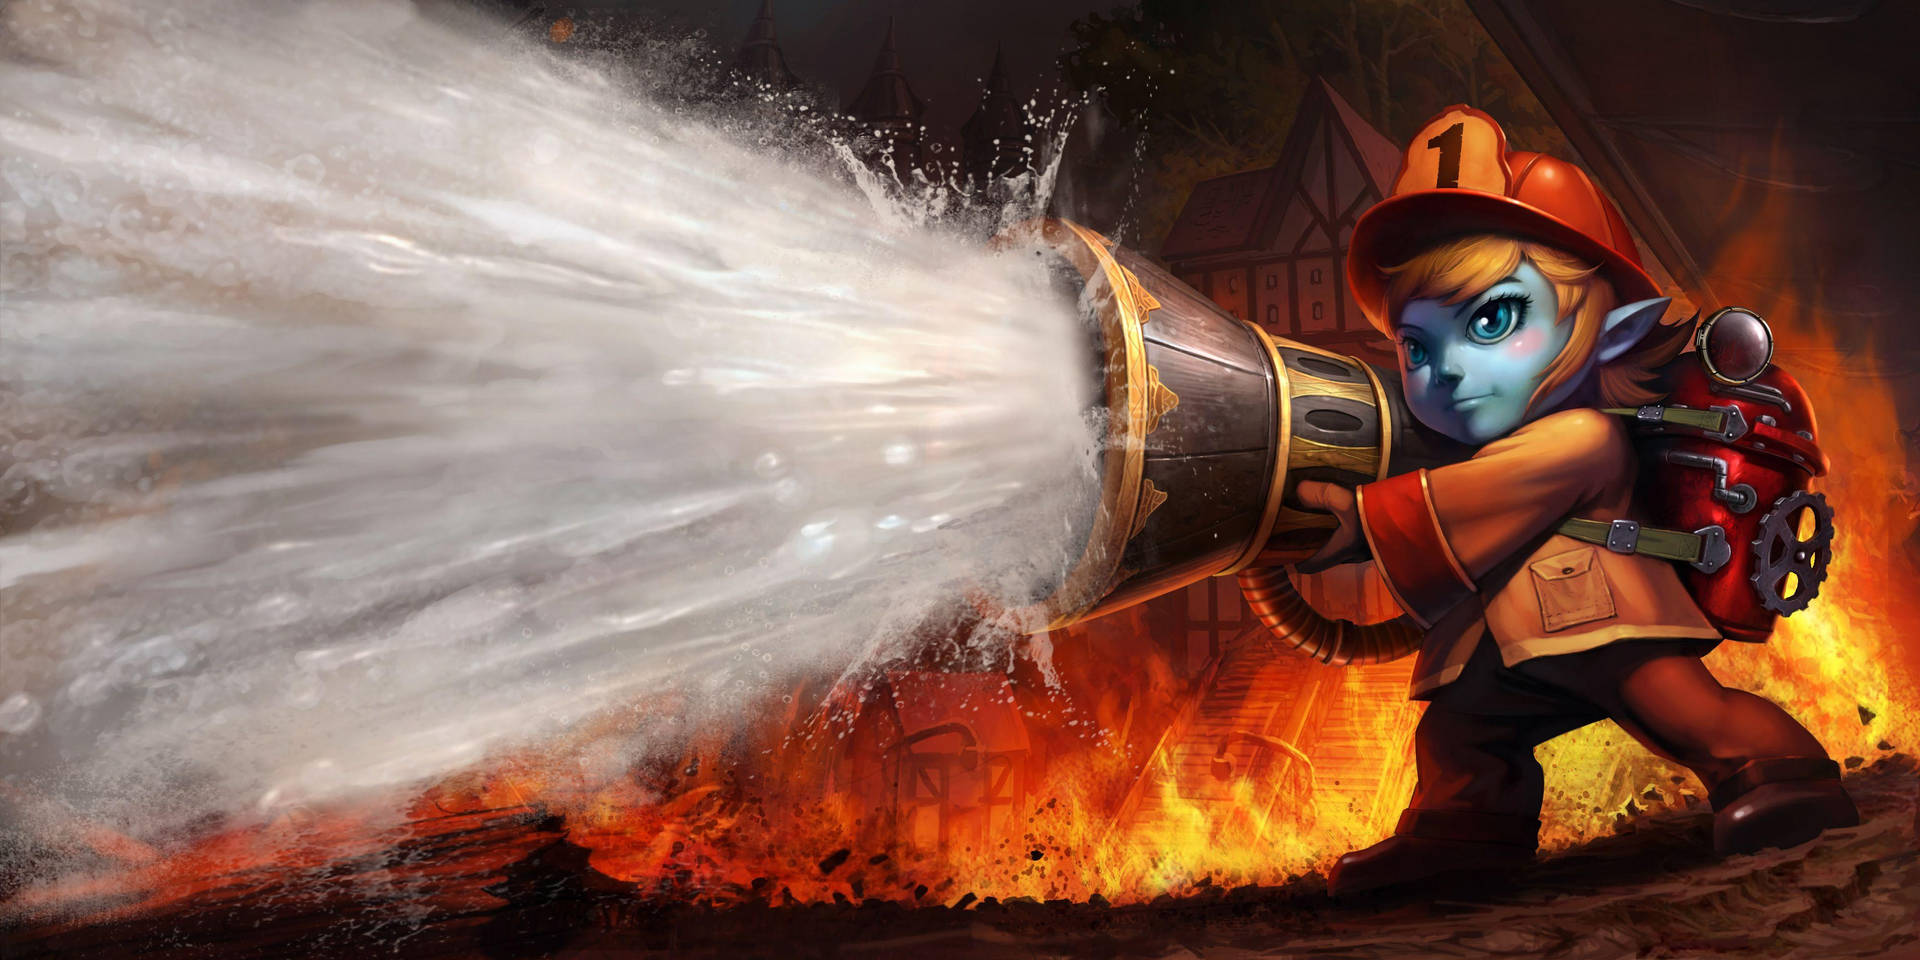 Animated Photo Of The Firefighter